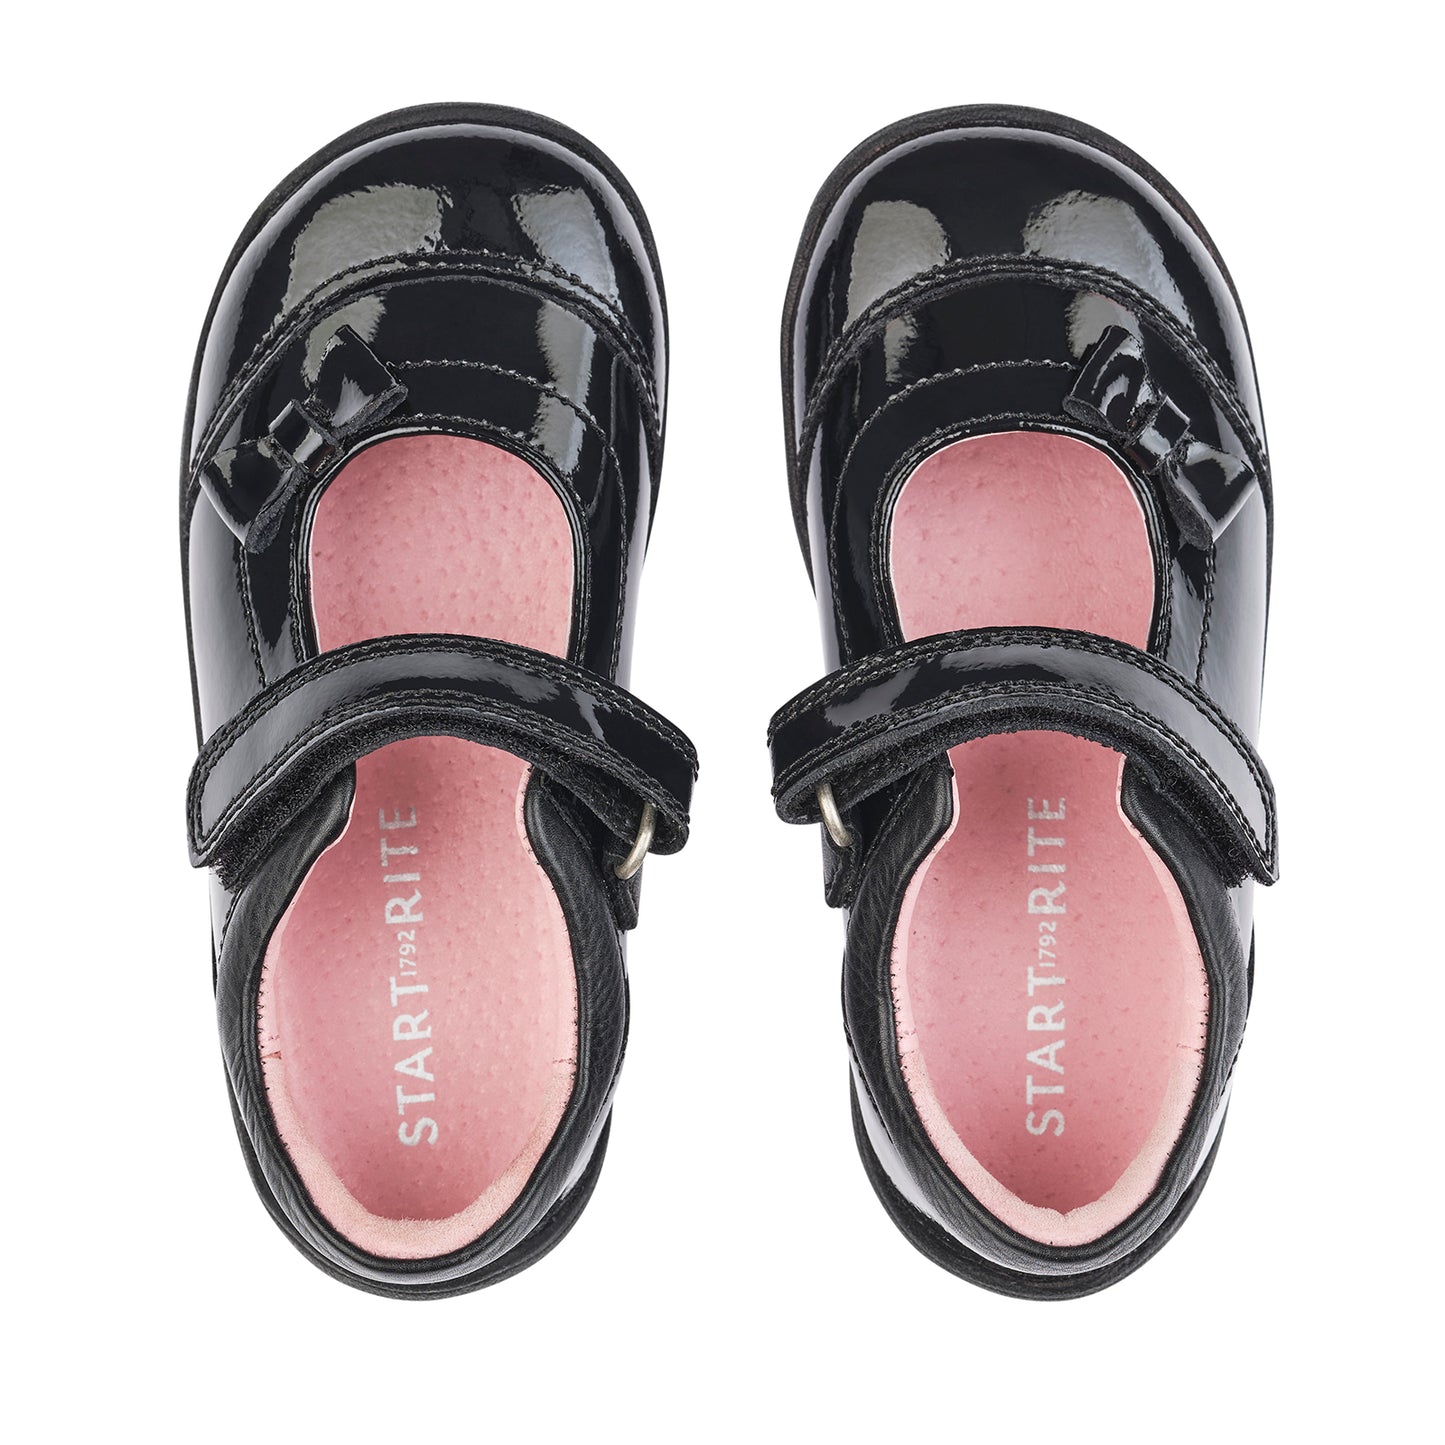 Twizzle Girl's Black Patent Leather First Shoe